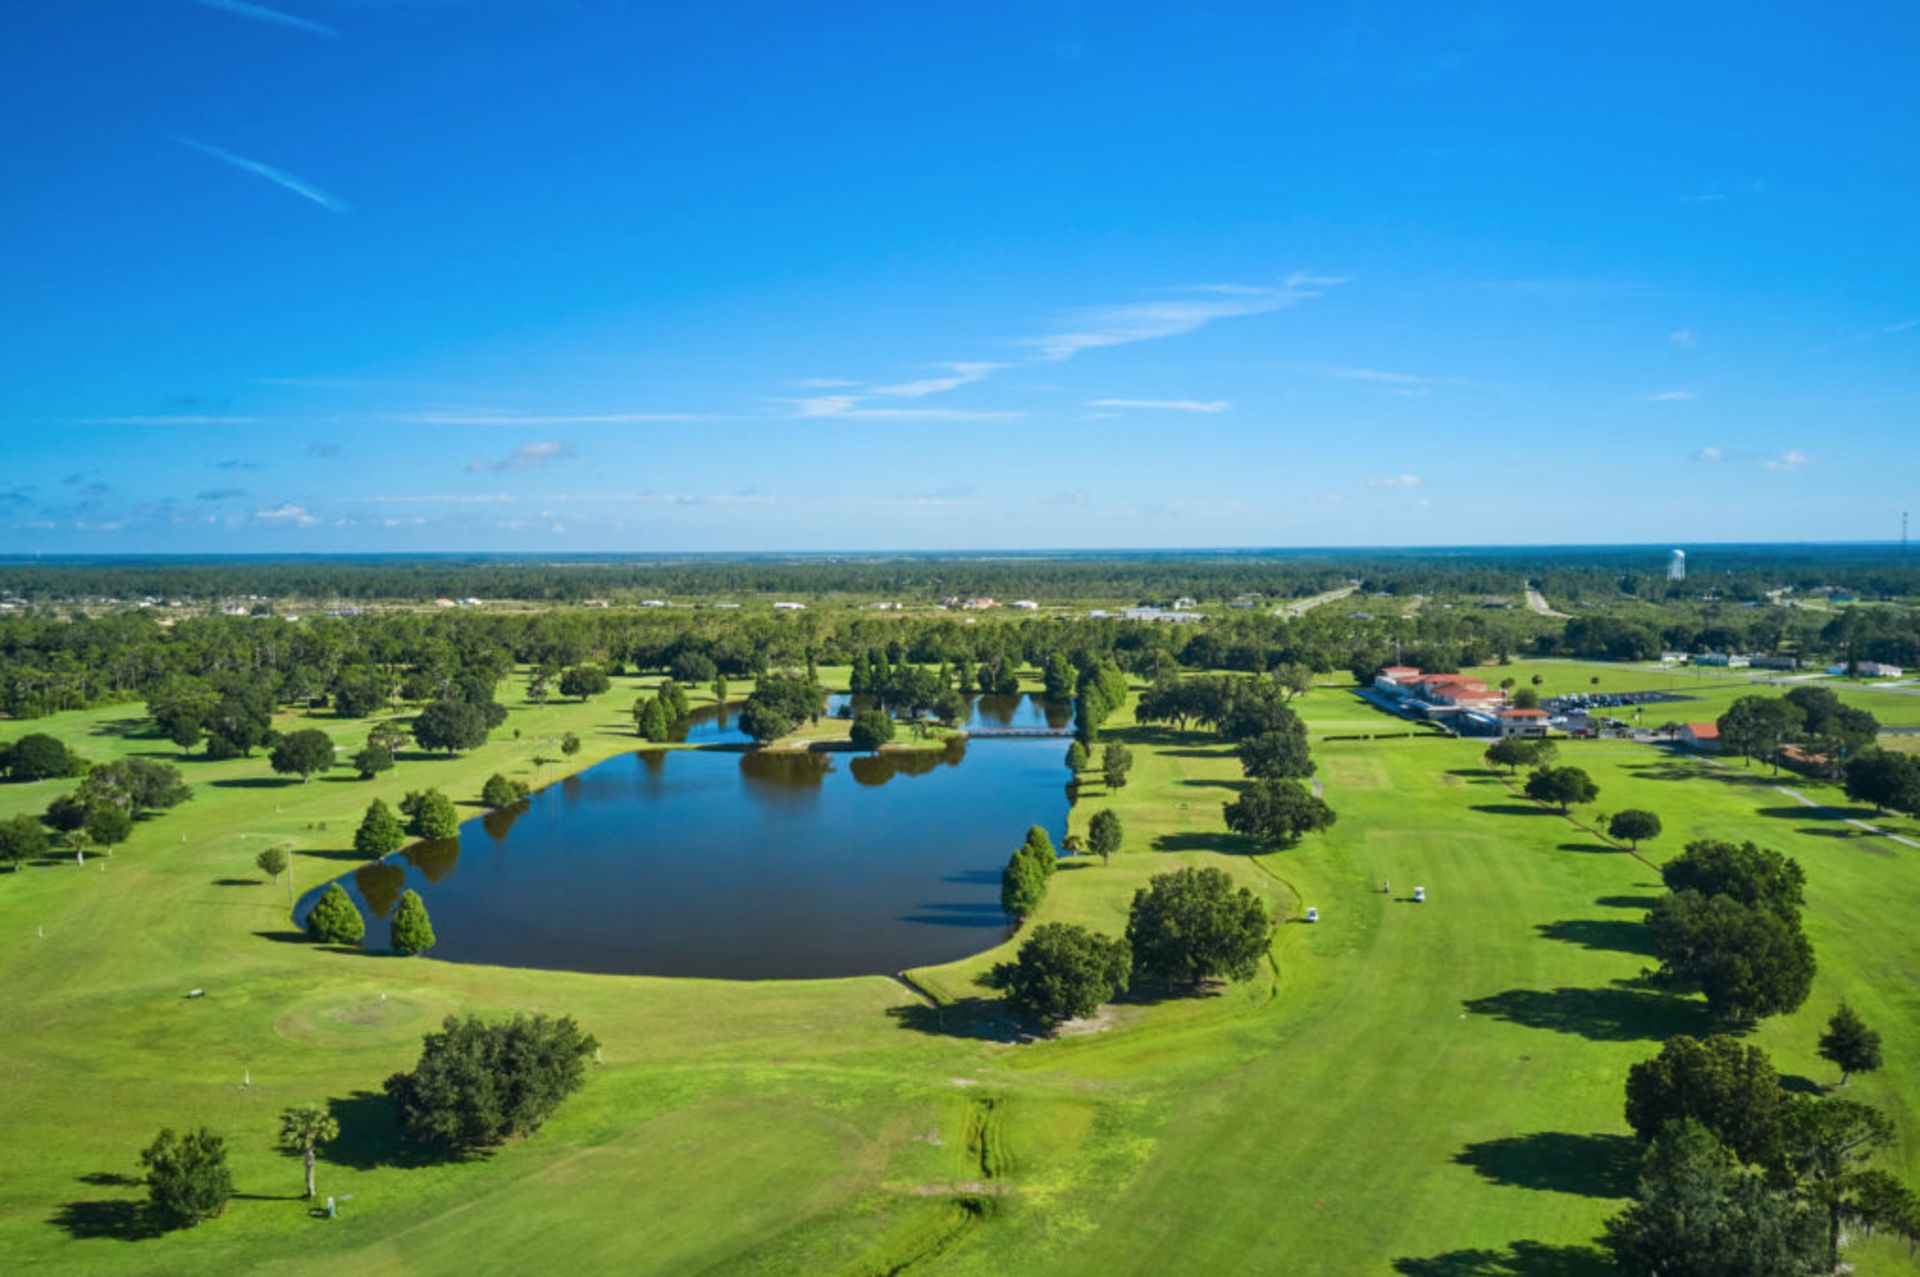 Build Your Central Florida Getaway on this Half-Acre Lot in Indian Lake Estates! - Image 5 of 11